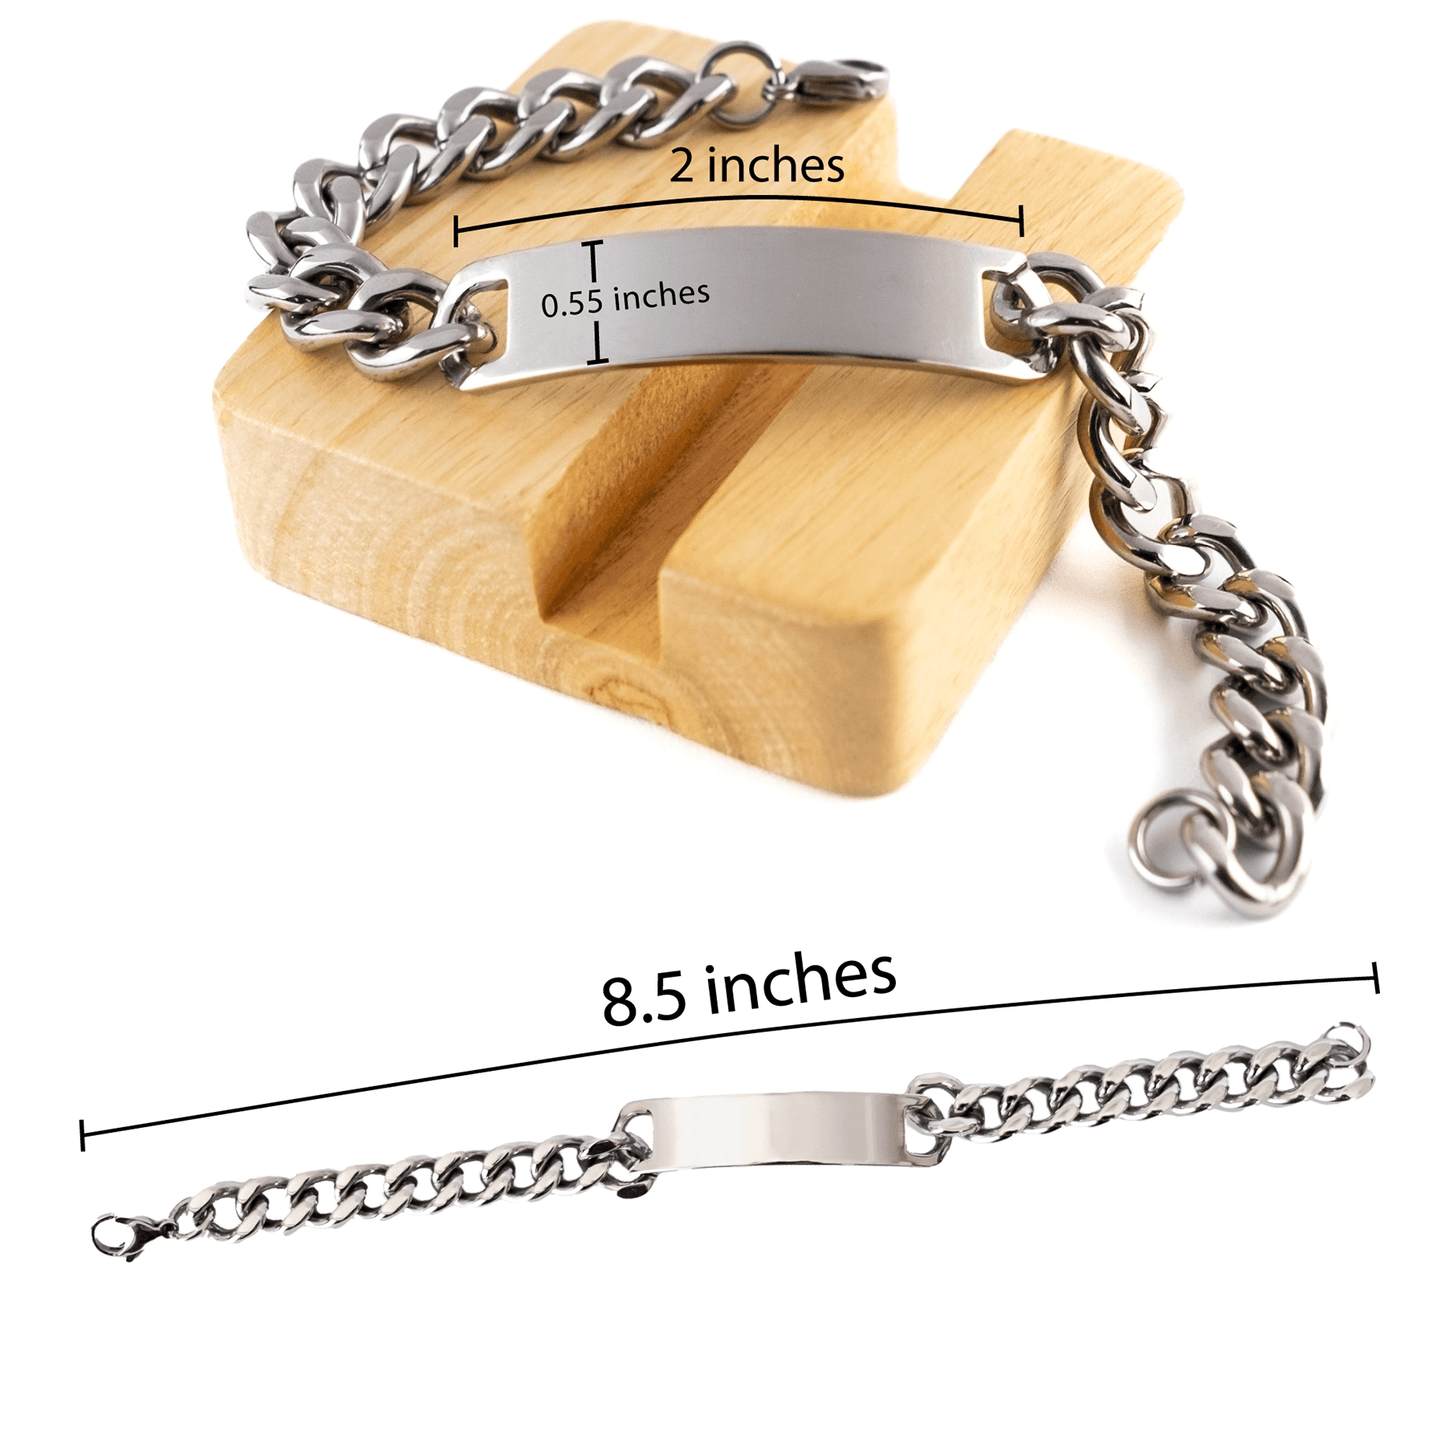 Remarkable Mail Carrier Gifts, Your dedication and hard work, Inspirational Birthday Christmas Unique Cuban Chain Stainless Steel Bracelet For Mail Carrier, Coworkers, Men, Women, Friends - Mallard Moon Gift Shop